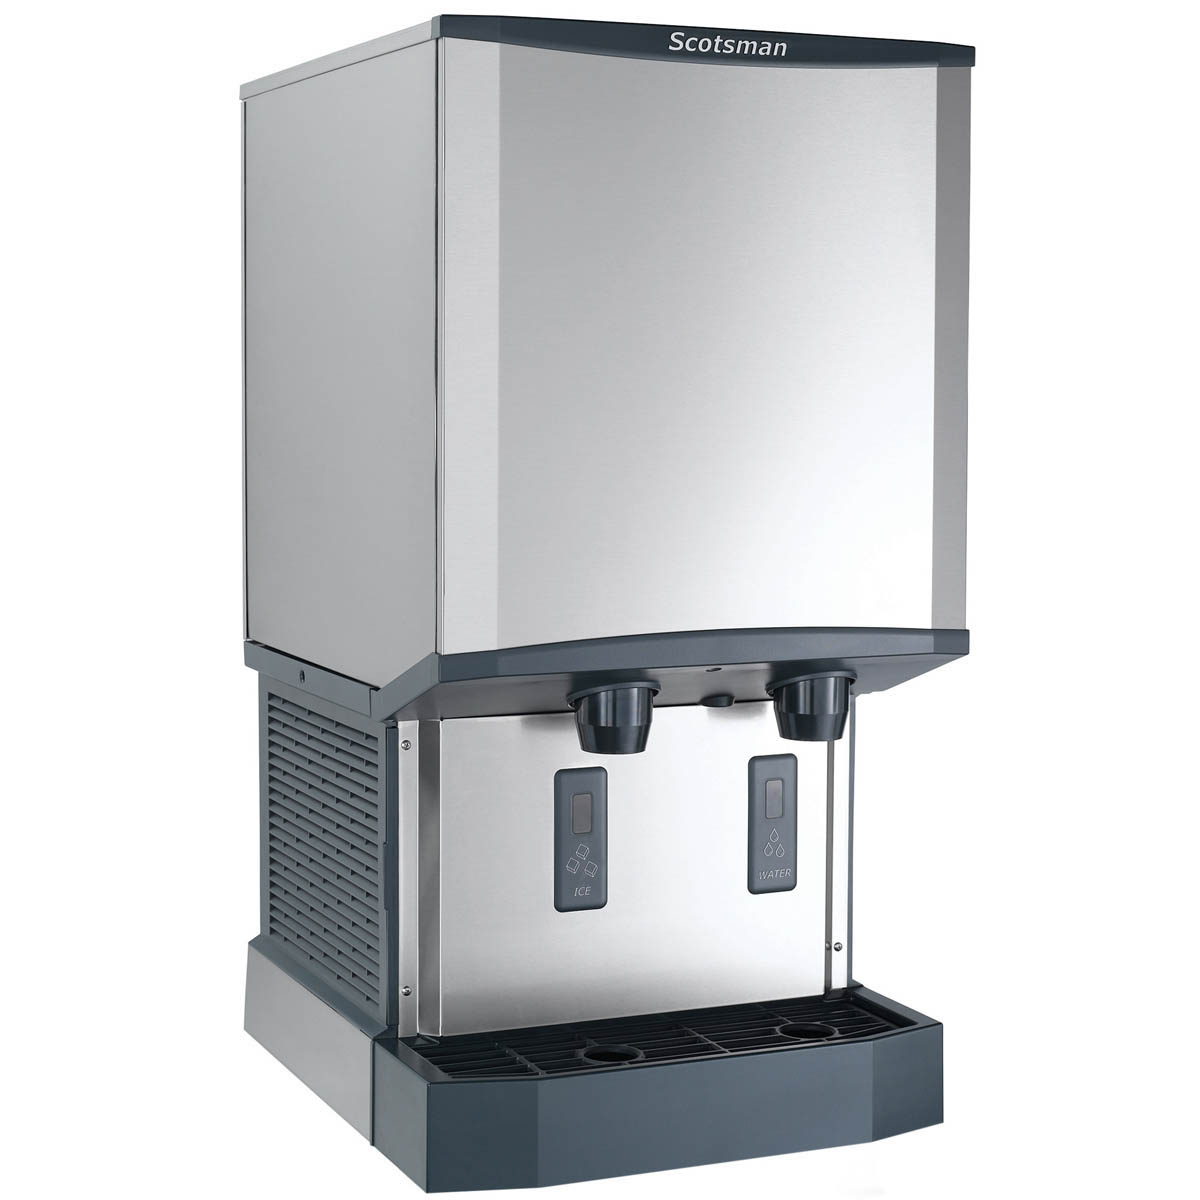 With Scotsman HID540AW-1 Easy to Serve Ice For Your Customers, Chef's Deal